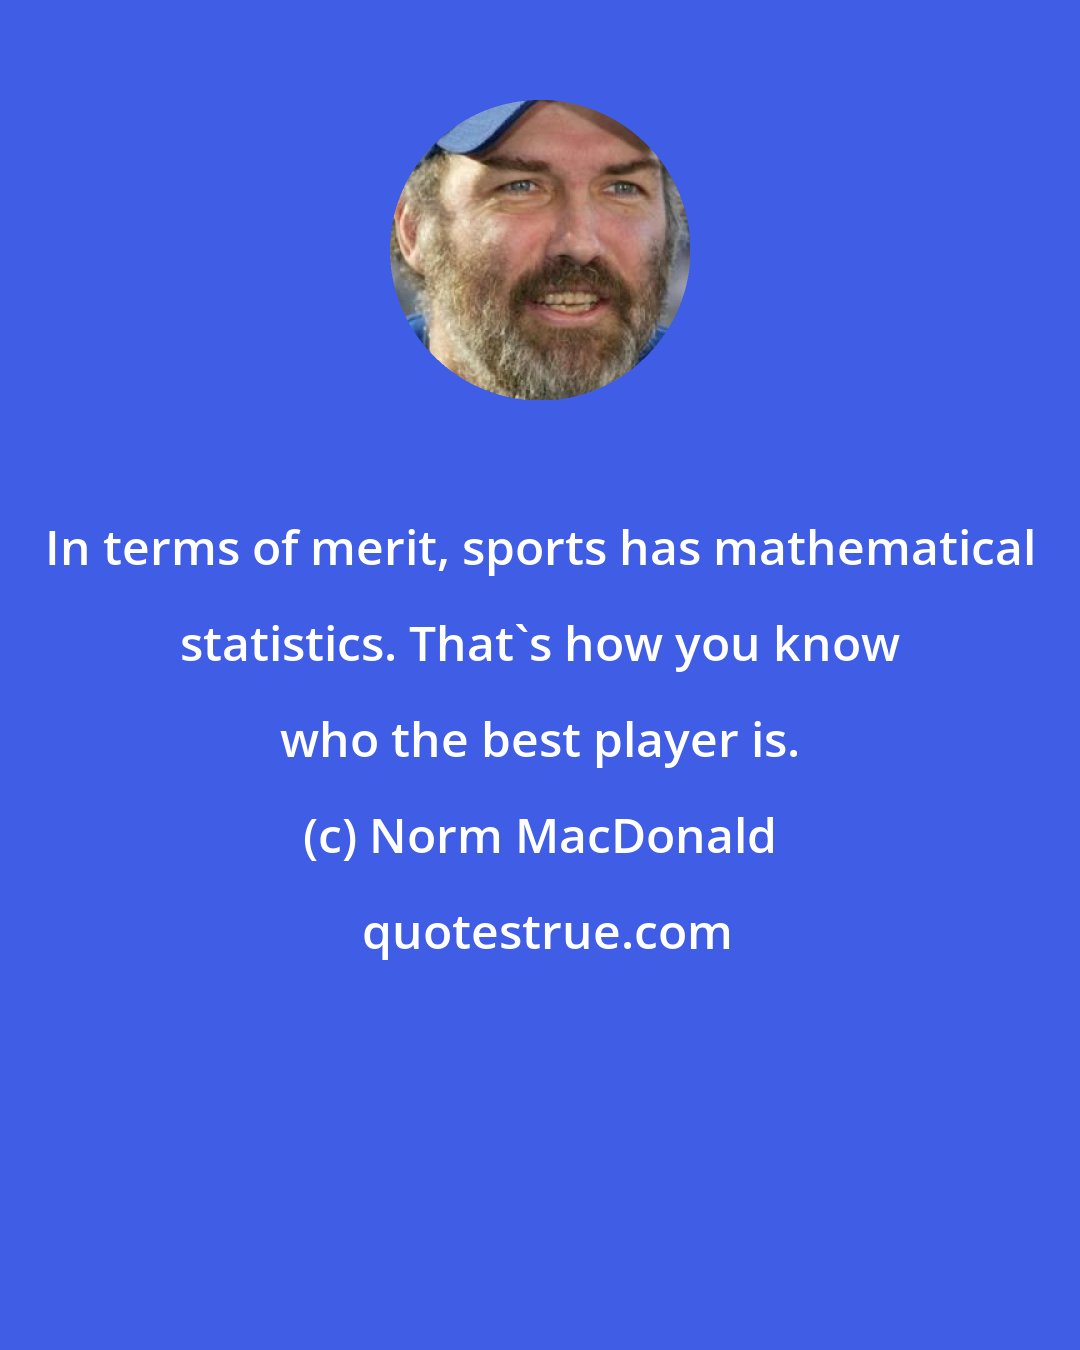 Norm MacDonald: In terms of merit, sports has mathematical statistics. That's how you know who the best player is.